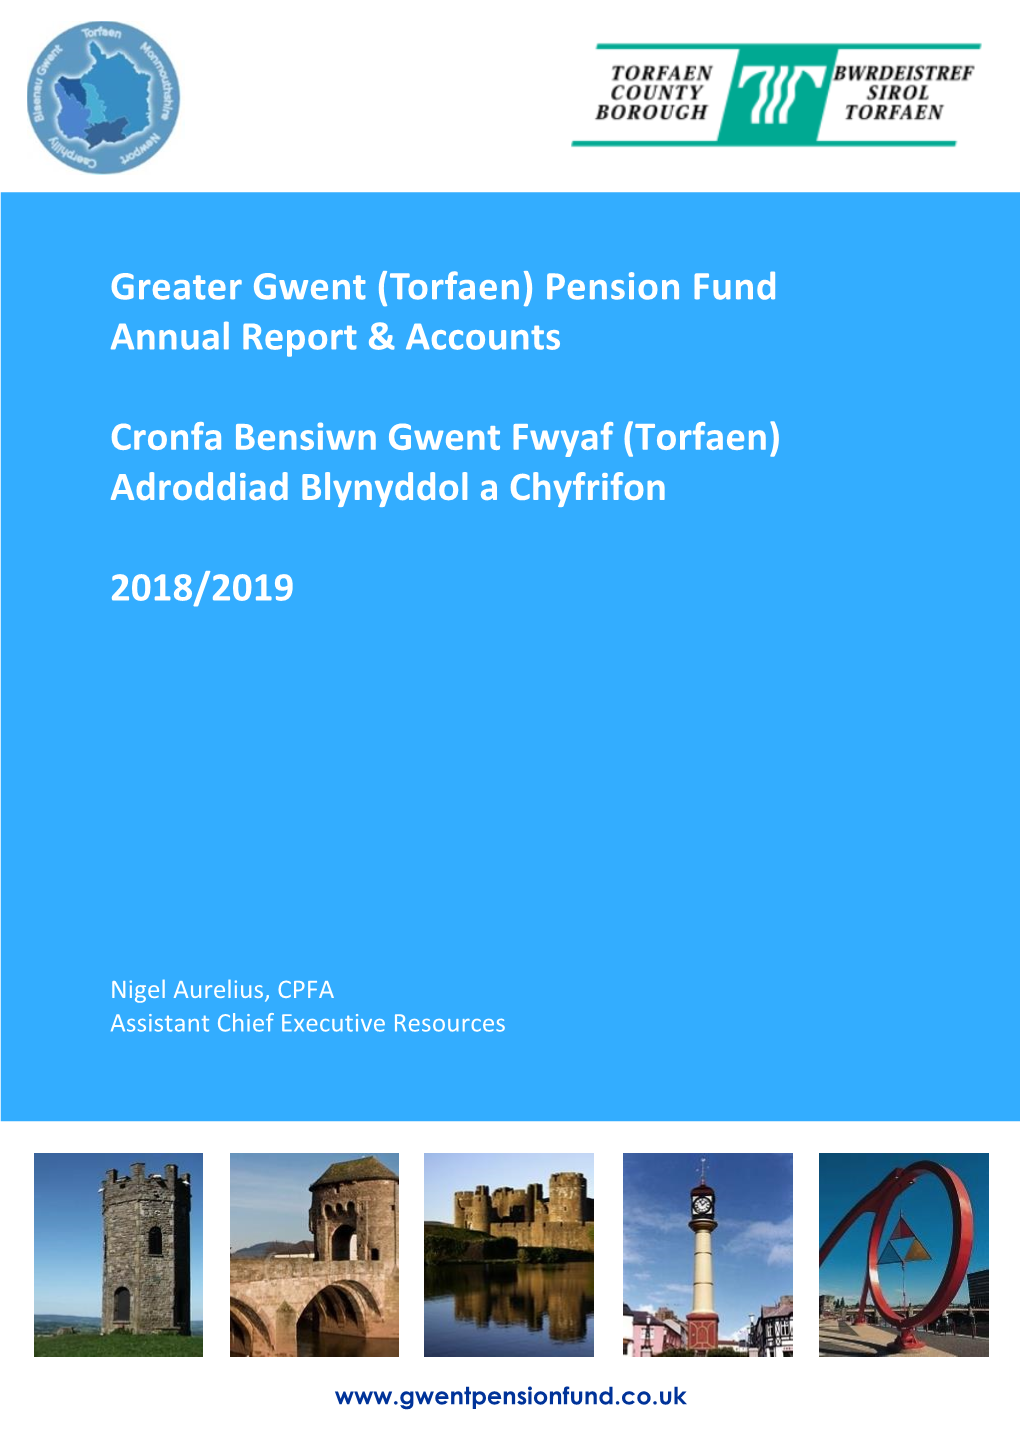 (Torfaen) Pension Fund Annual Report & Accounts 2018-2019